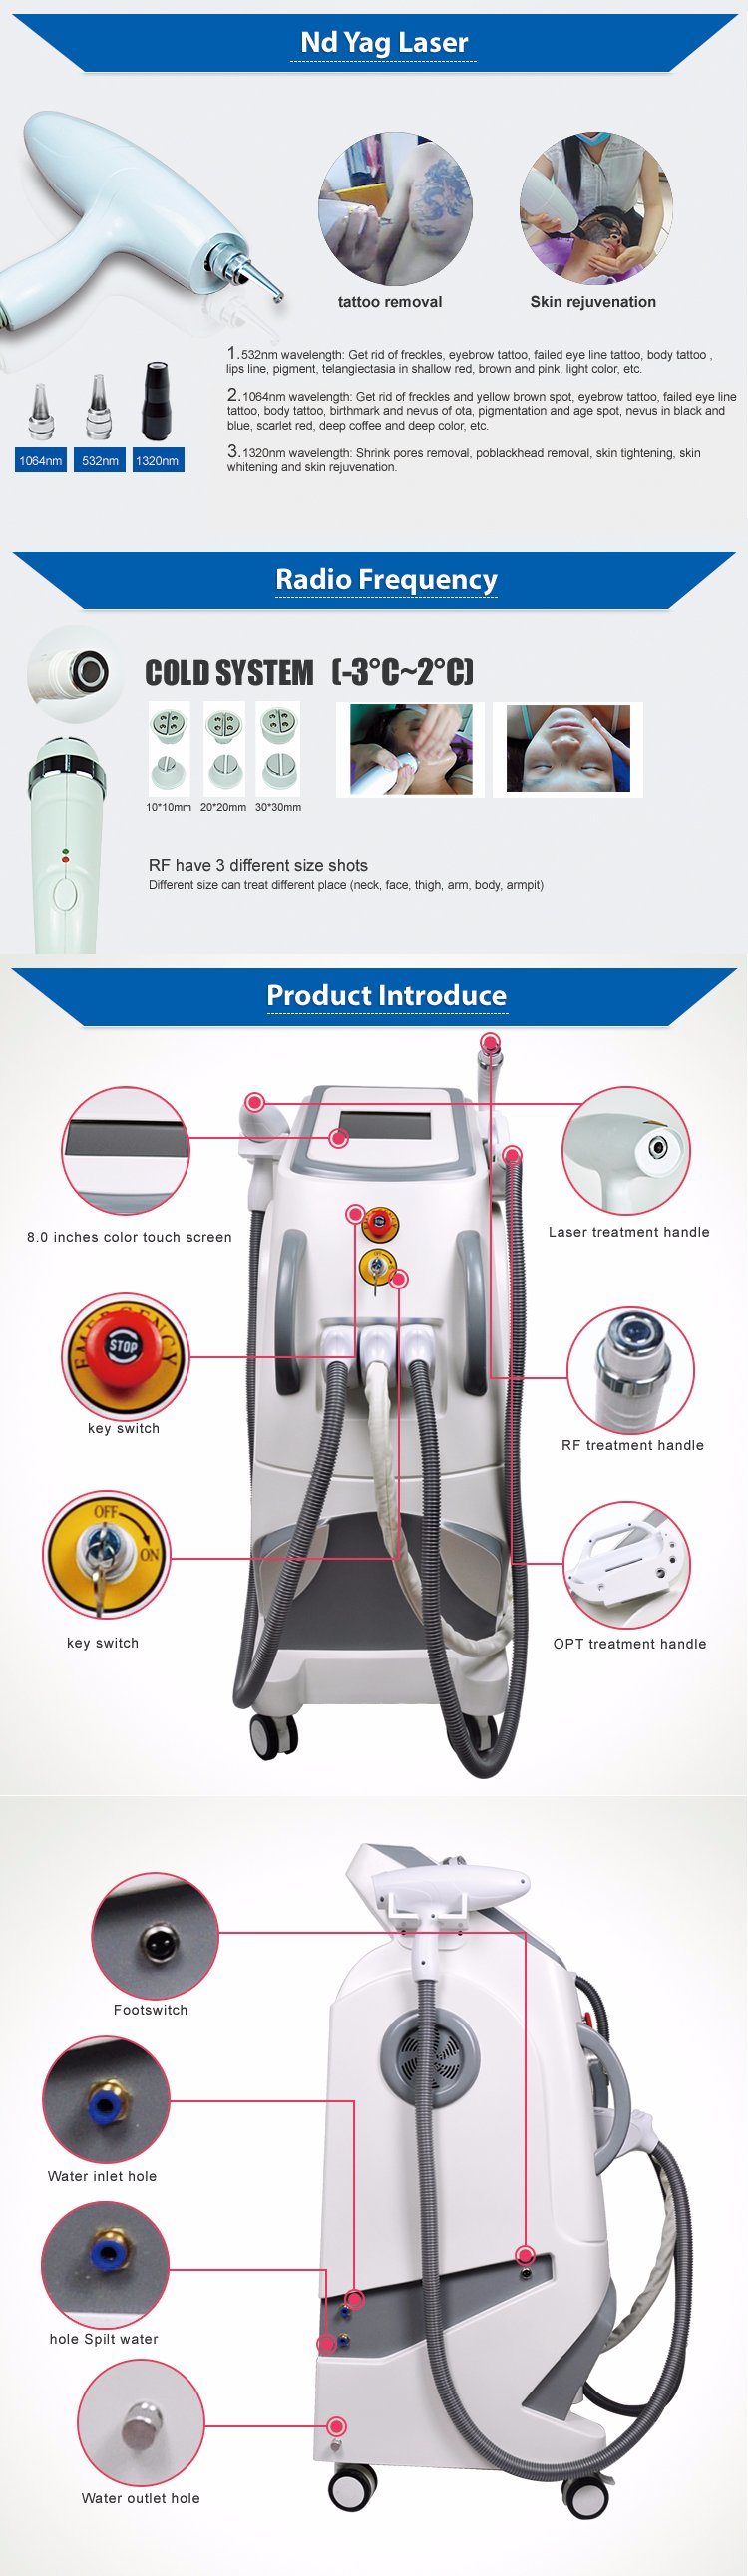 China Manufacturer Skin Tightening RF Tattoo Removal Laser Hair Removal